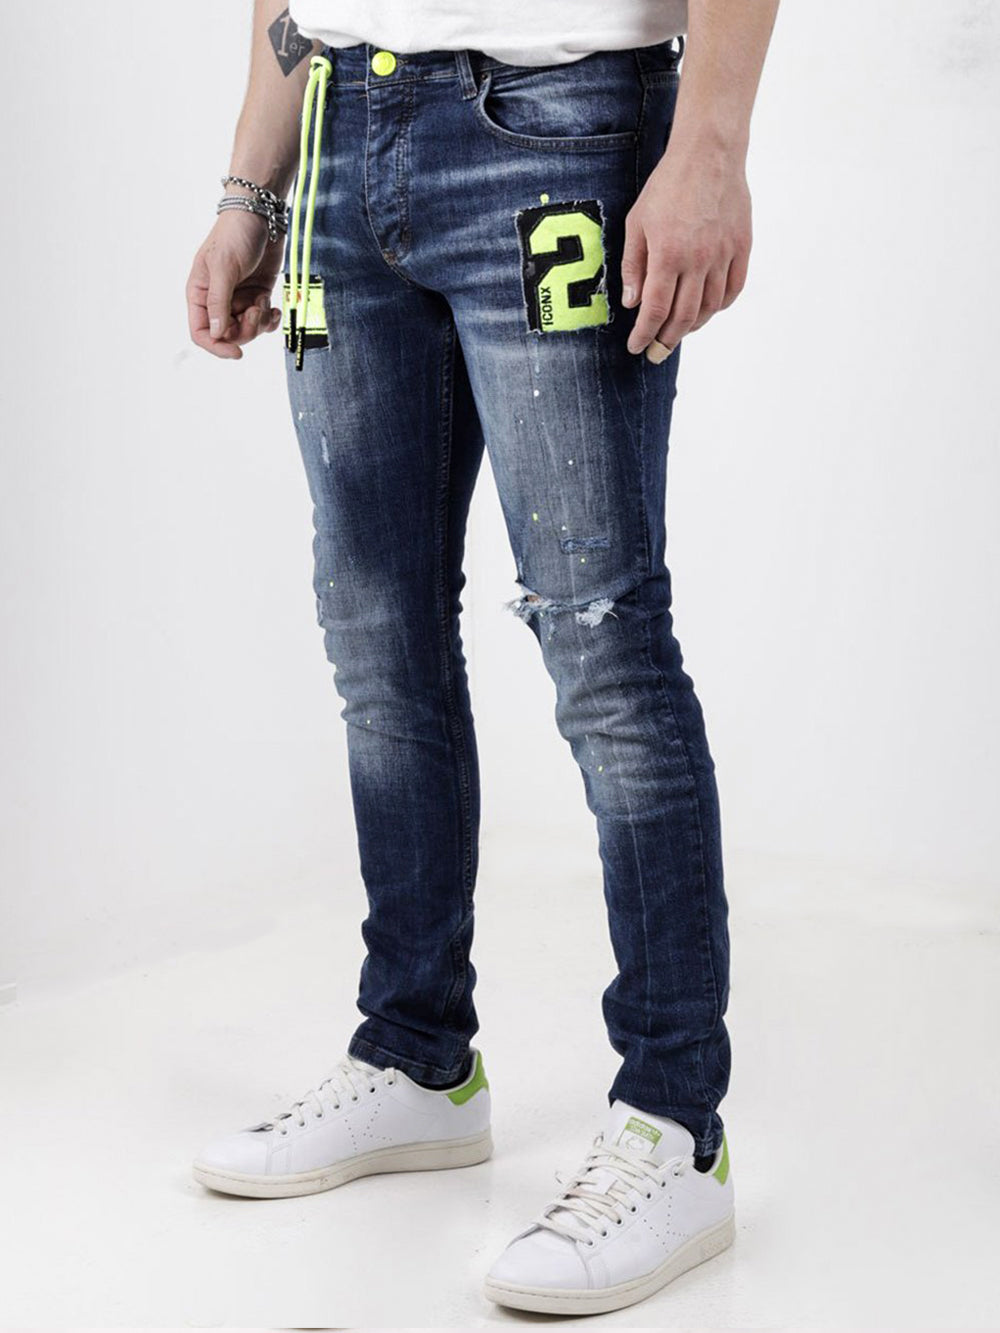 A man wearing a pair of Phosphorus jeans with a number on them.